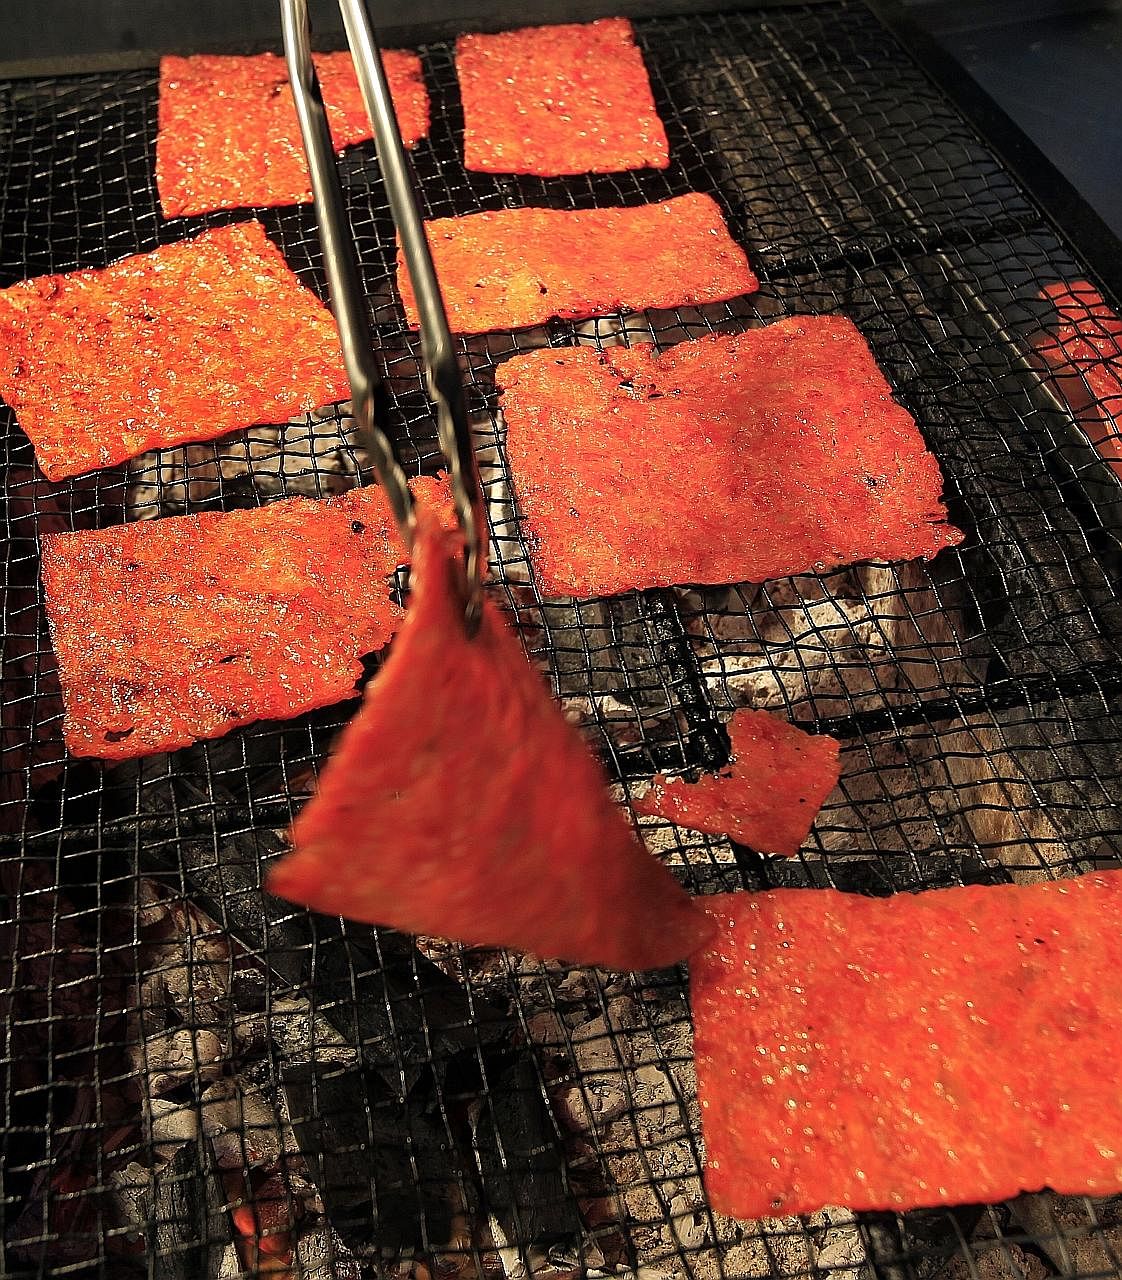 Bak kwa is called “long yoke” in Cantonese, which means to have good fortune.